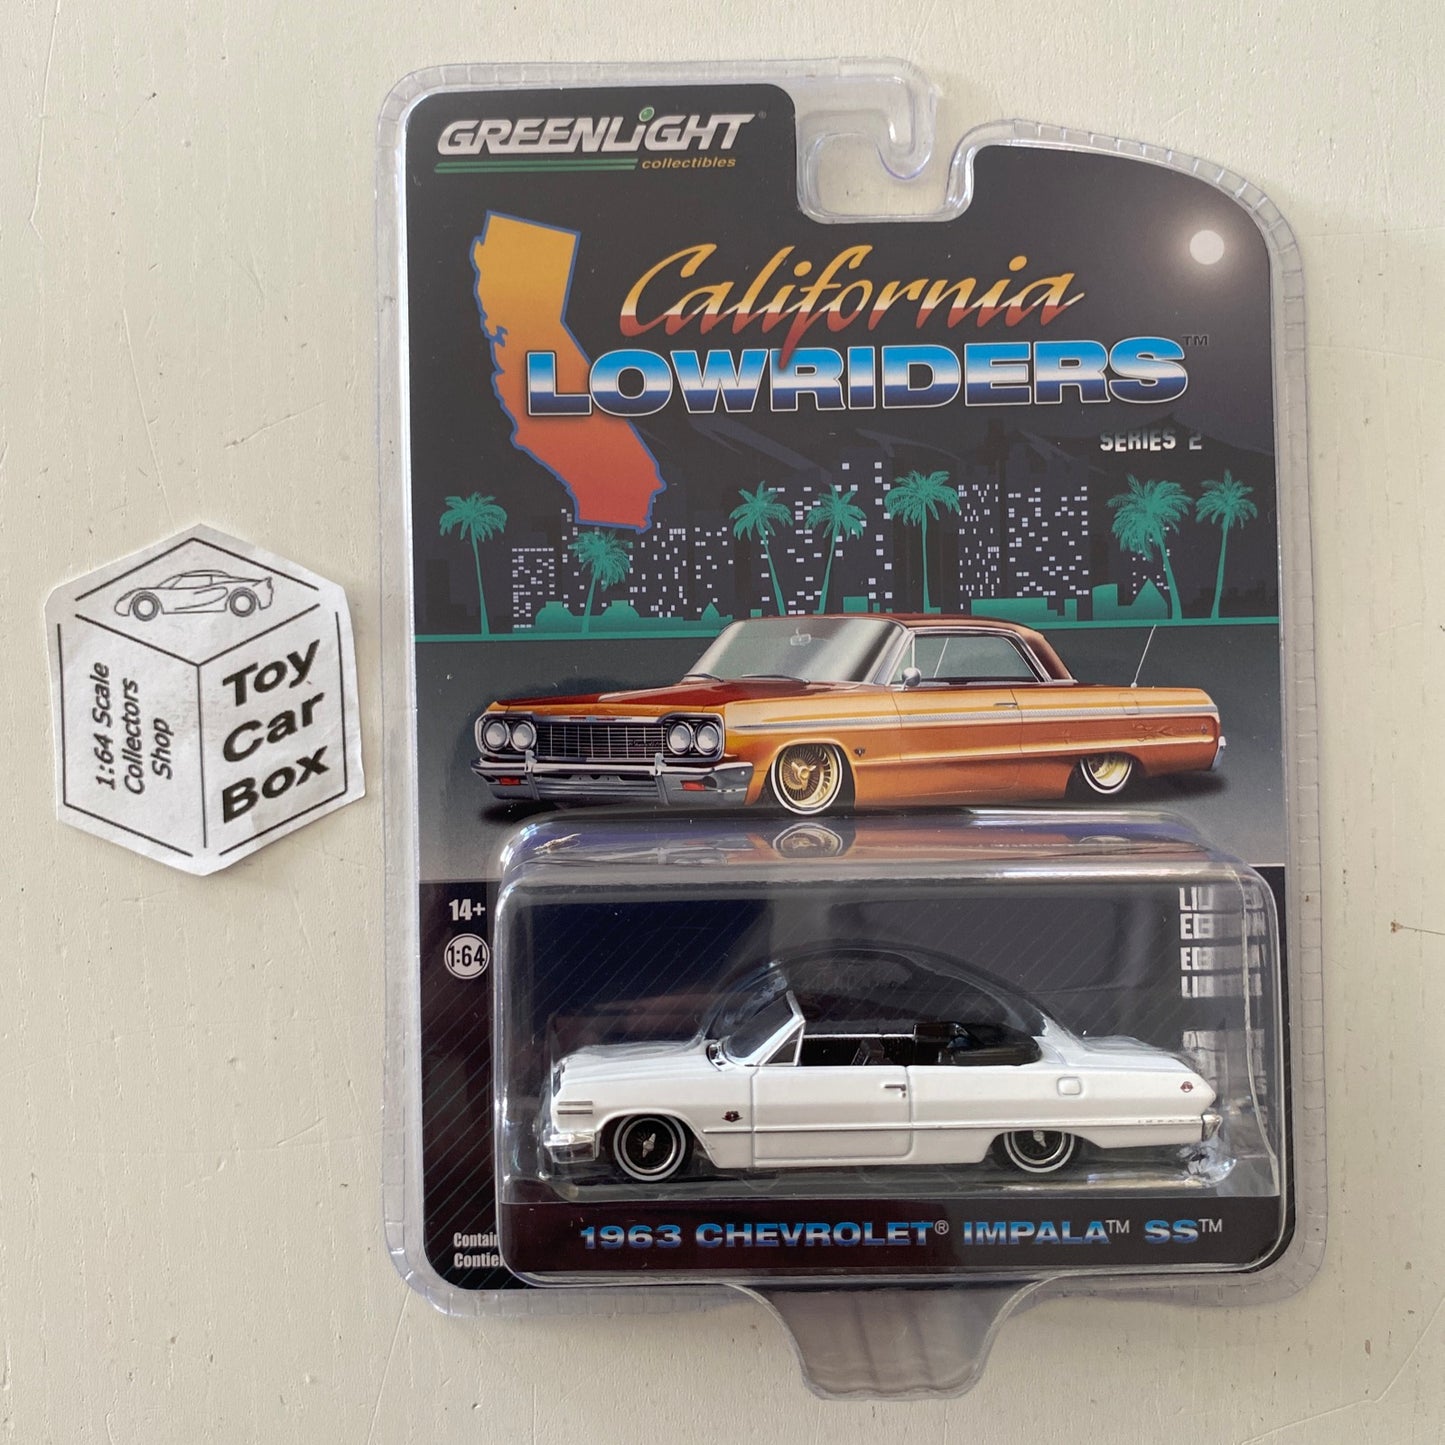 GREENLIGHT - 1963 Chevy Impala SS (White - 1:64 Scale - Low Riders Series 2) J95